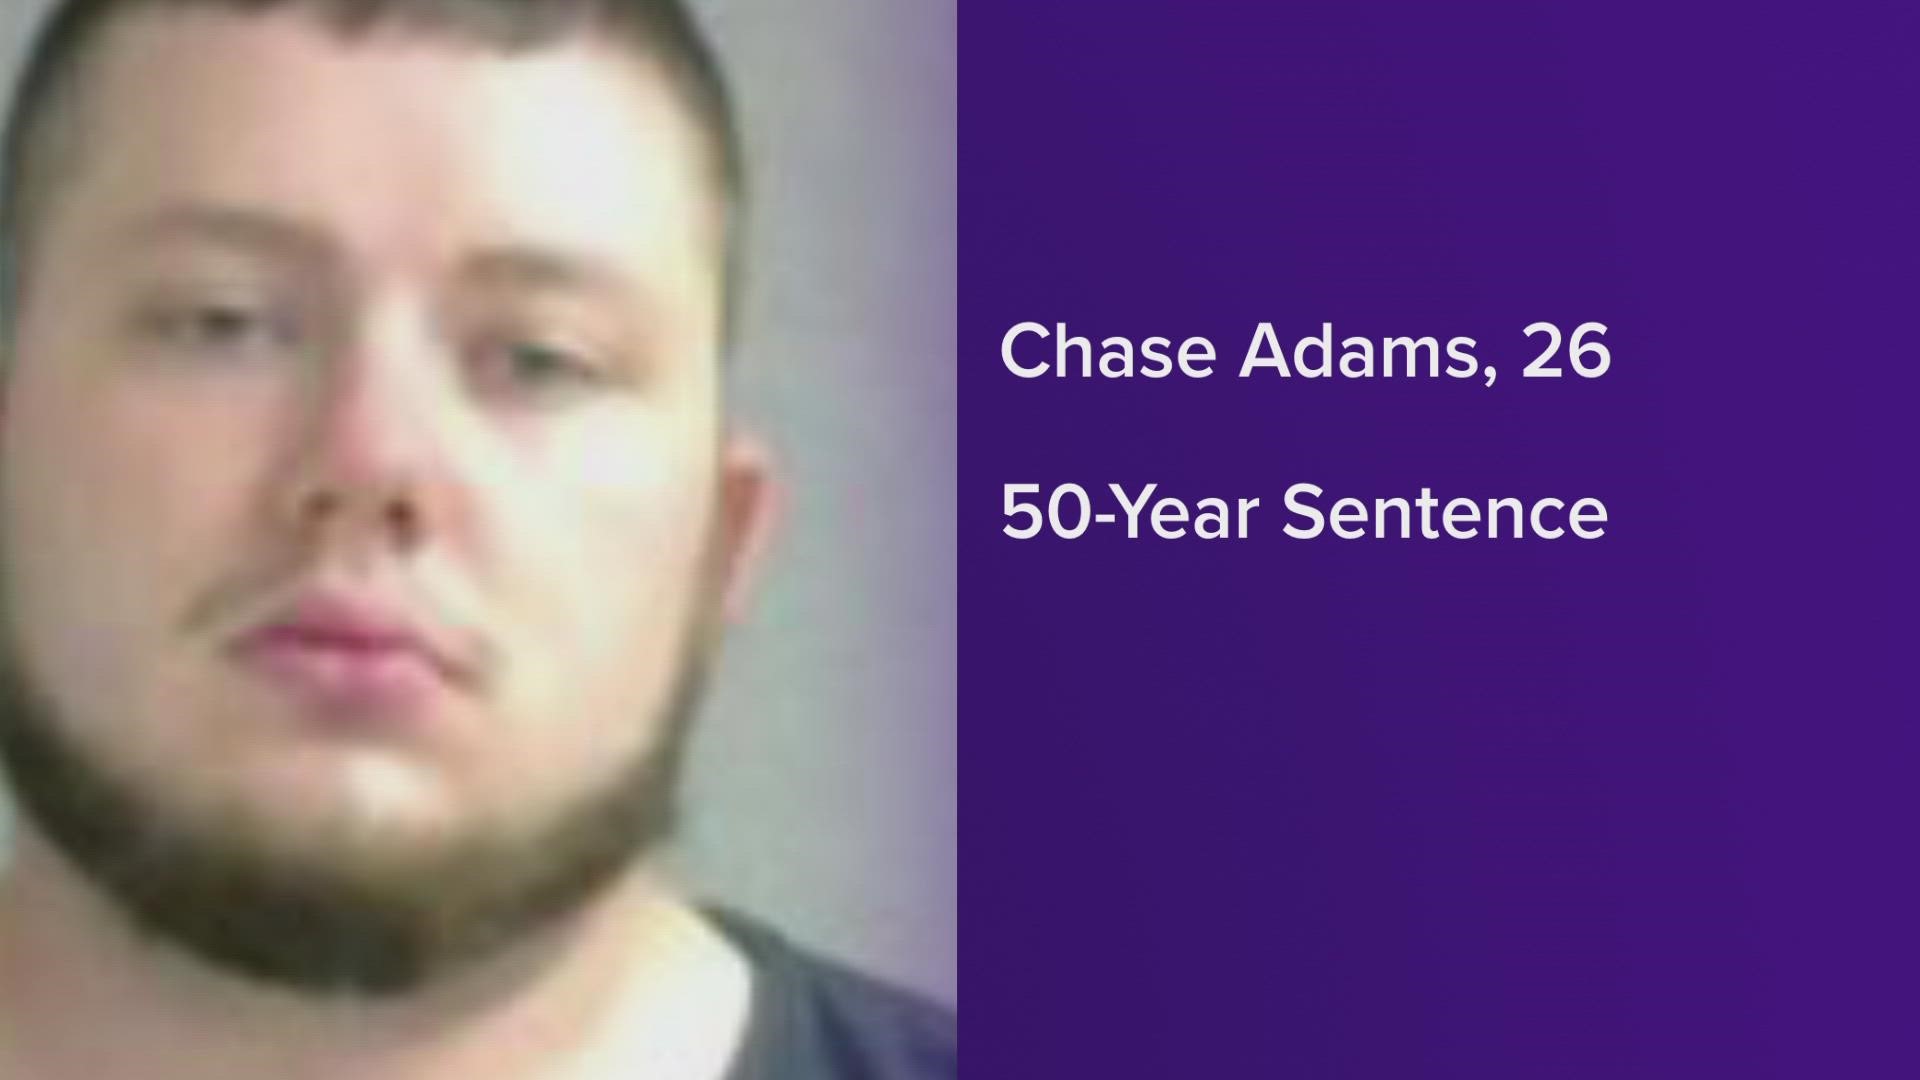 Chase Adams will spend the next 50 years behind bars for the 2020 murder of Rex Morrison.